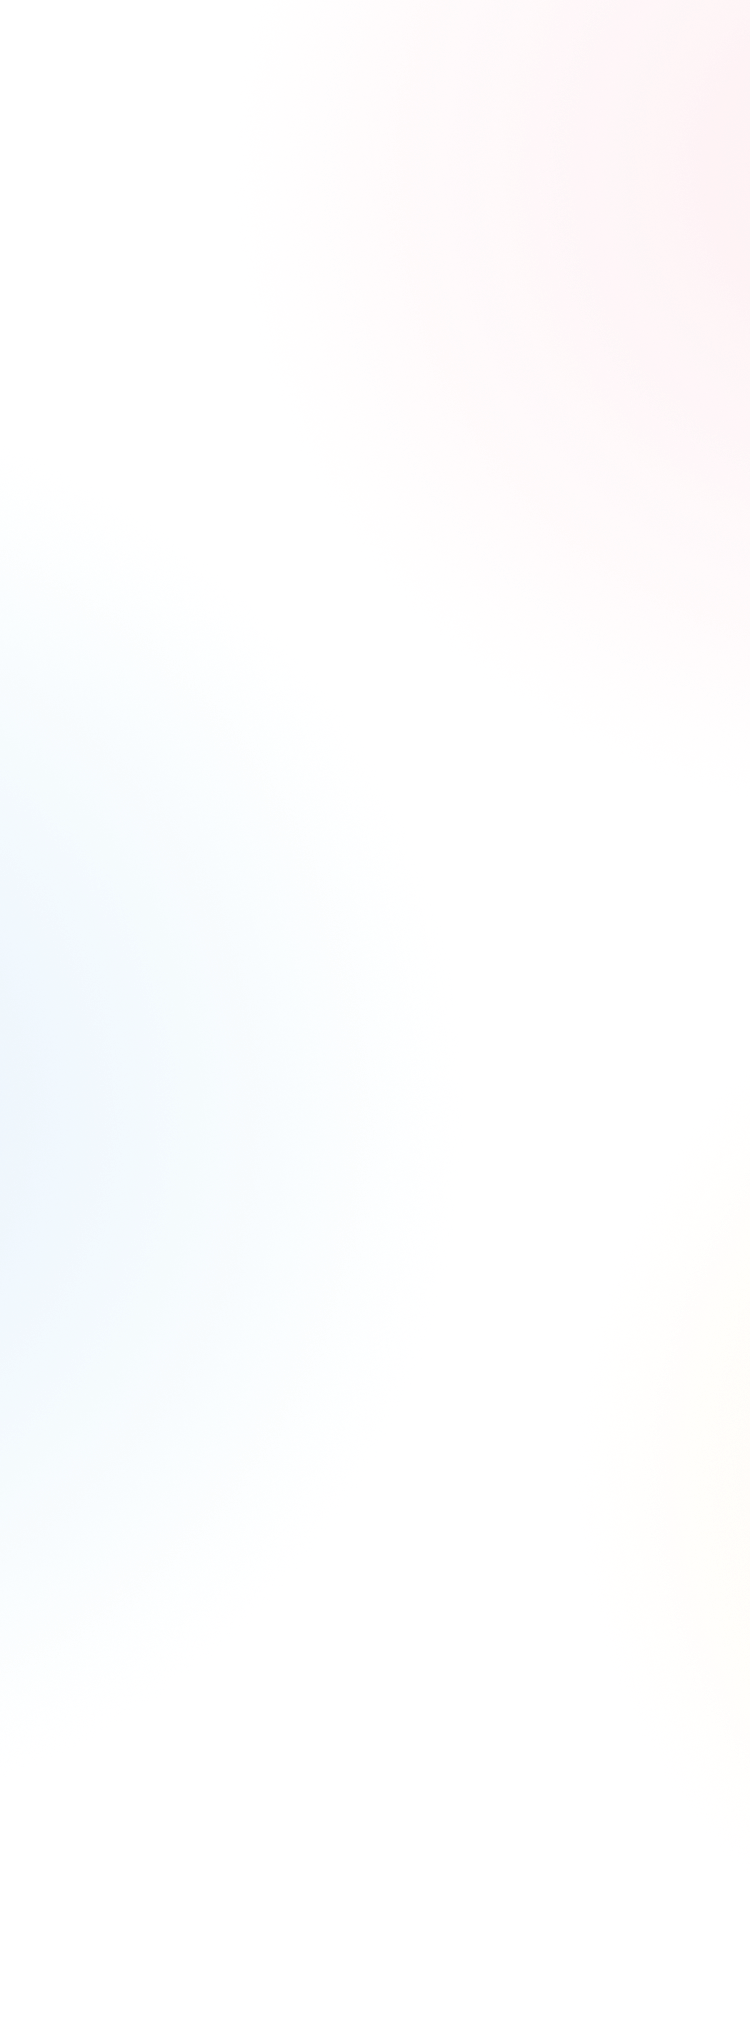 Background image with radial colors